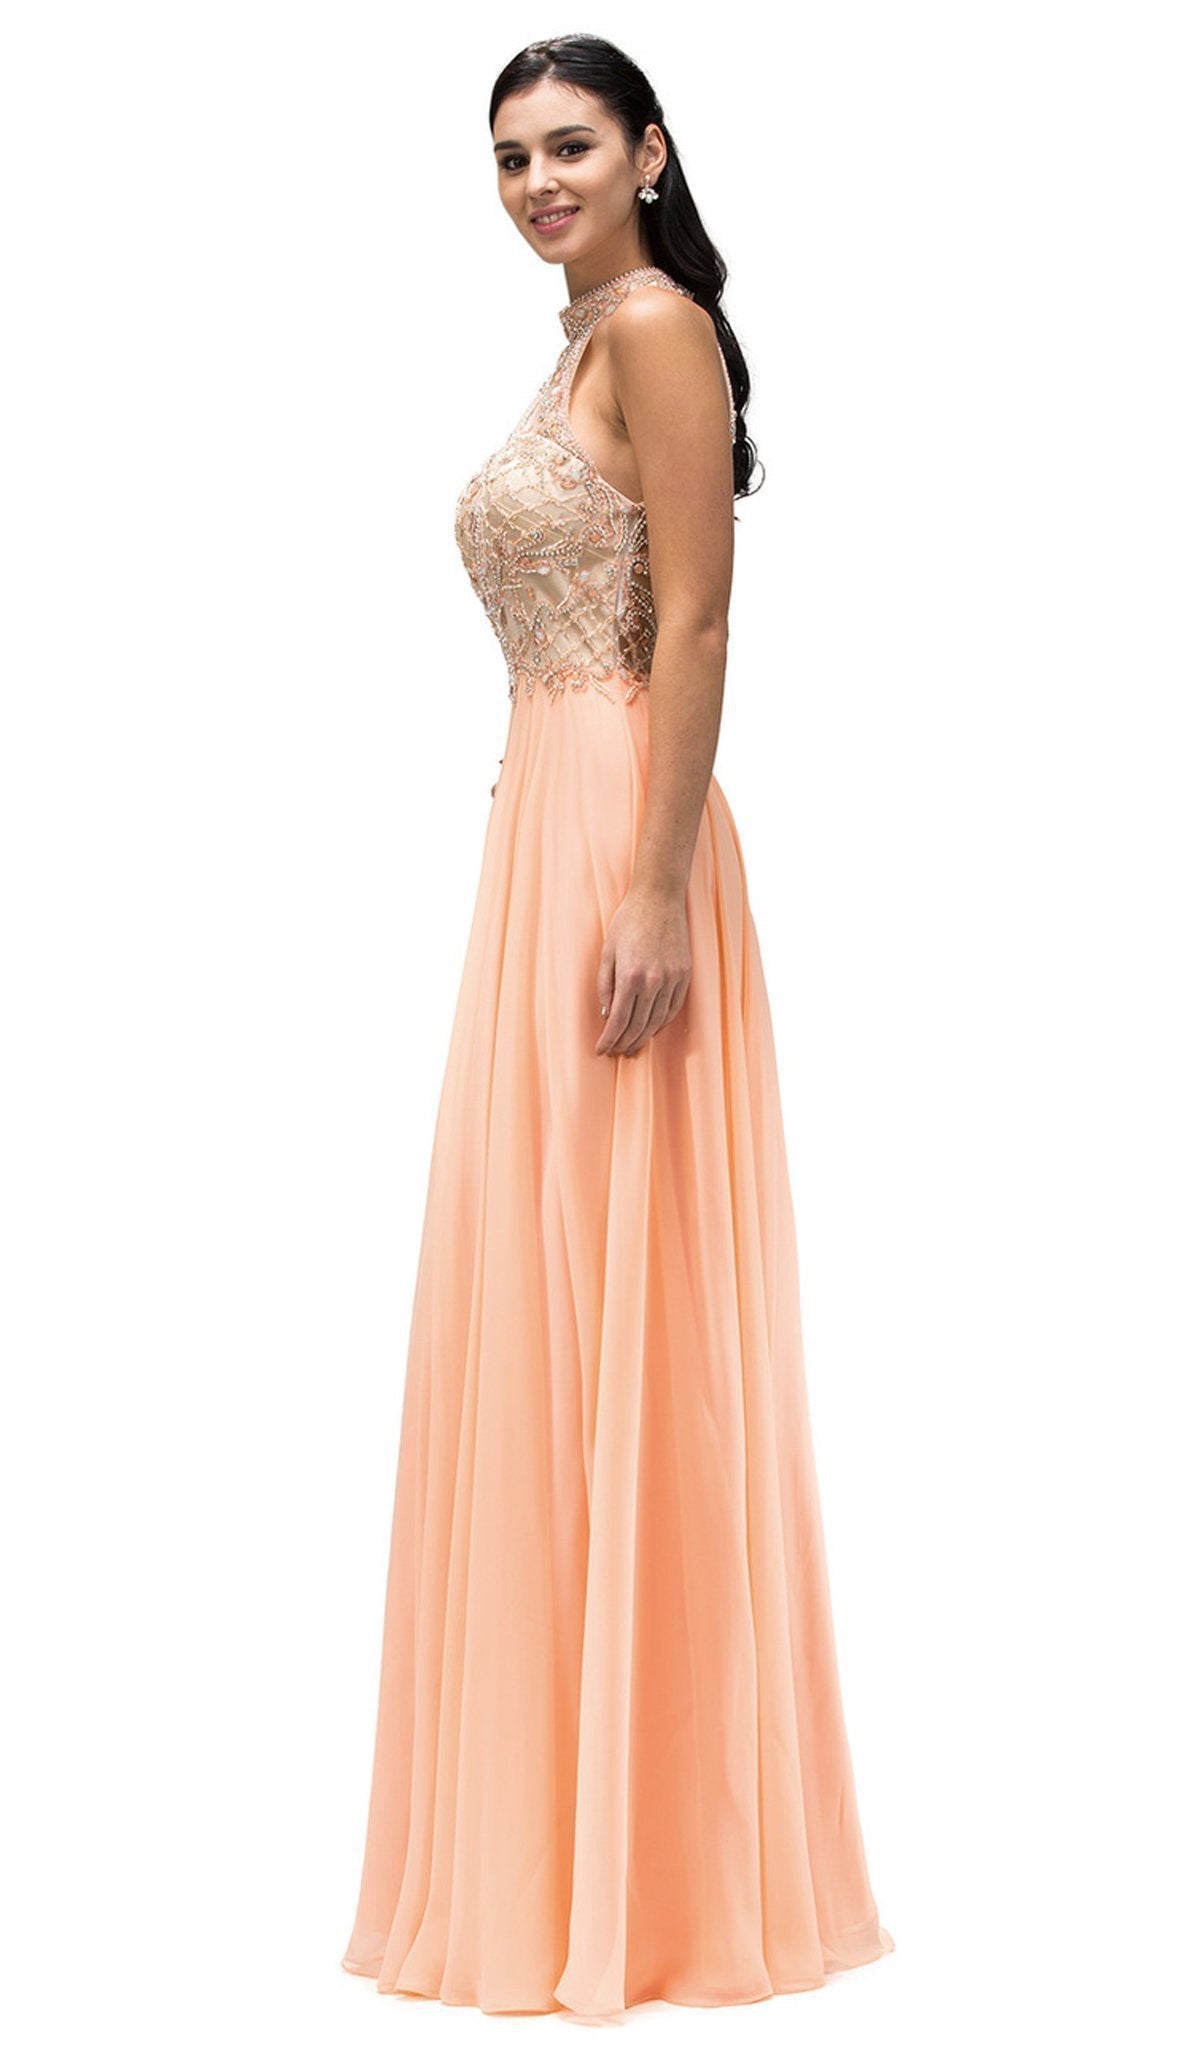 Dancing Queen - 9293 Exquisite Illusion High Halter Chiffon A-Line Gown Special Occasion Dress XS / Peach